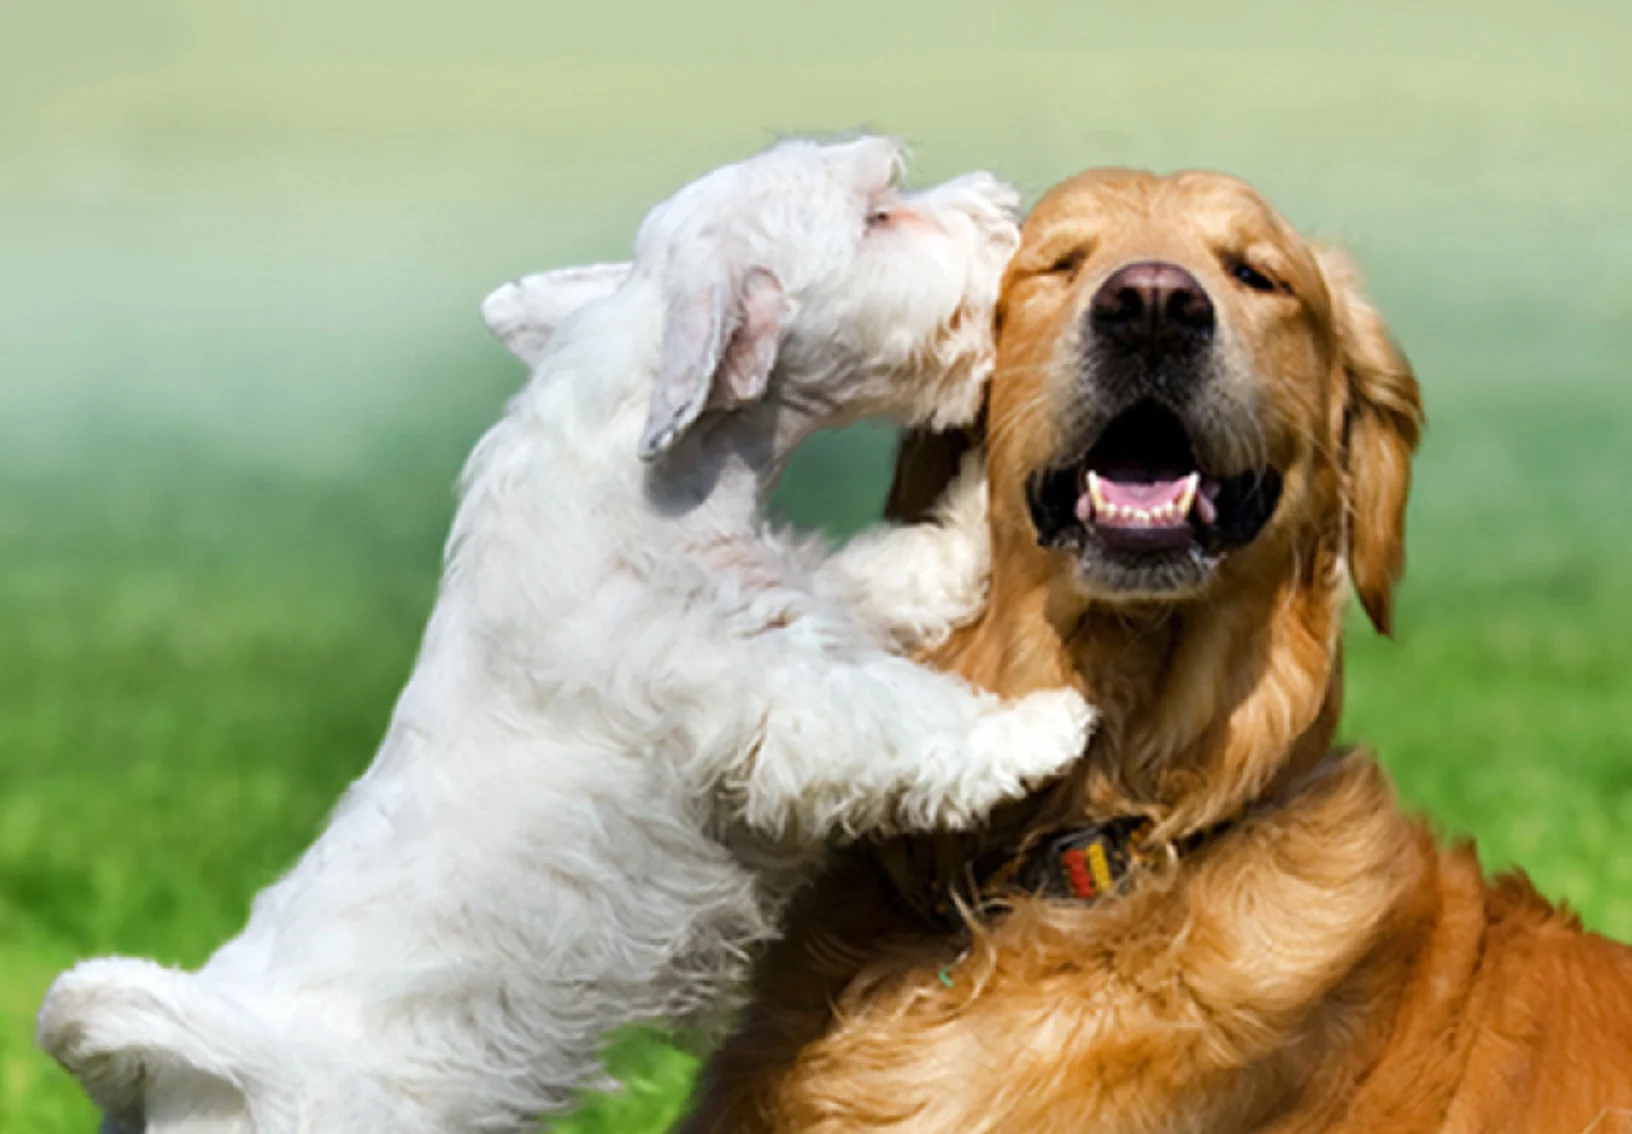 A white dog and a brown dog embracing in a grassy setting